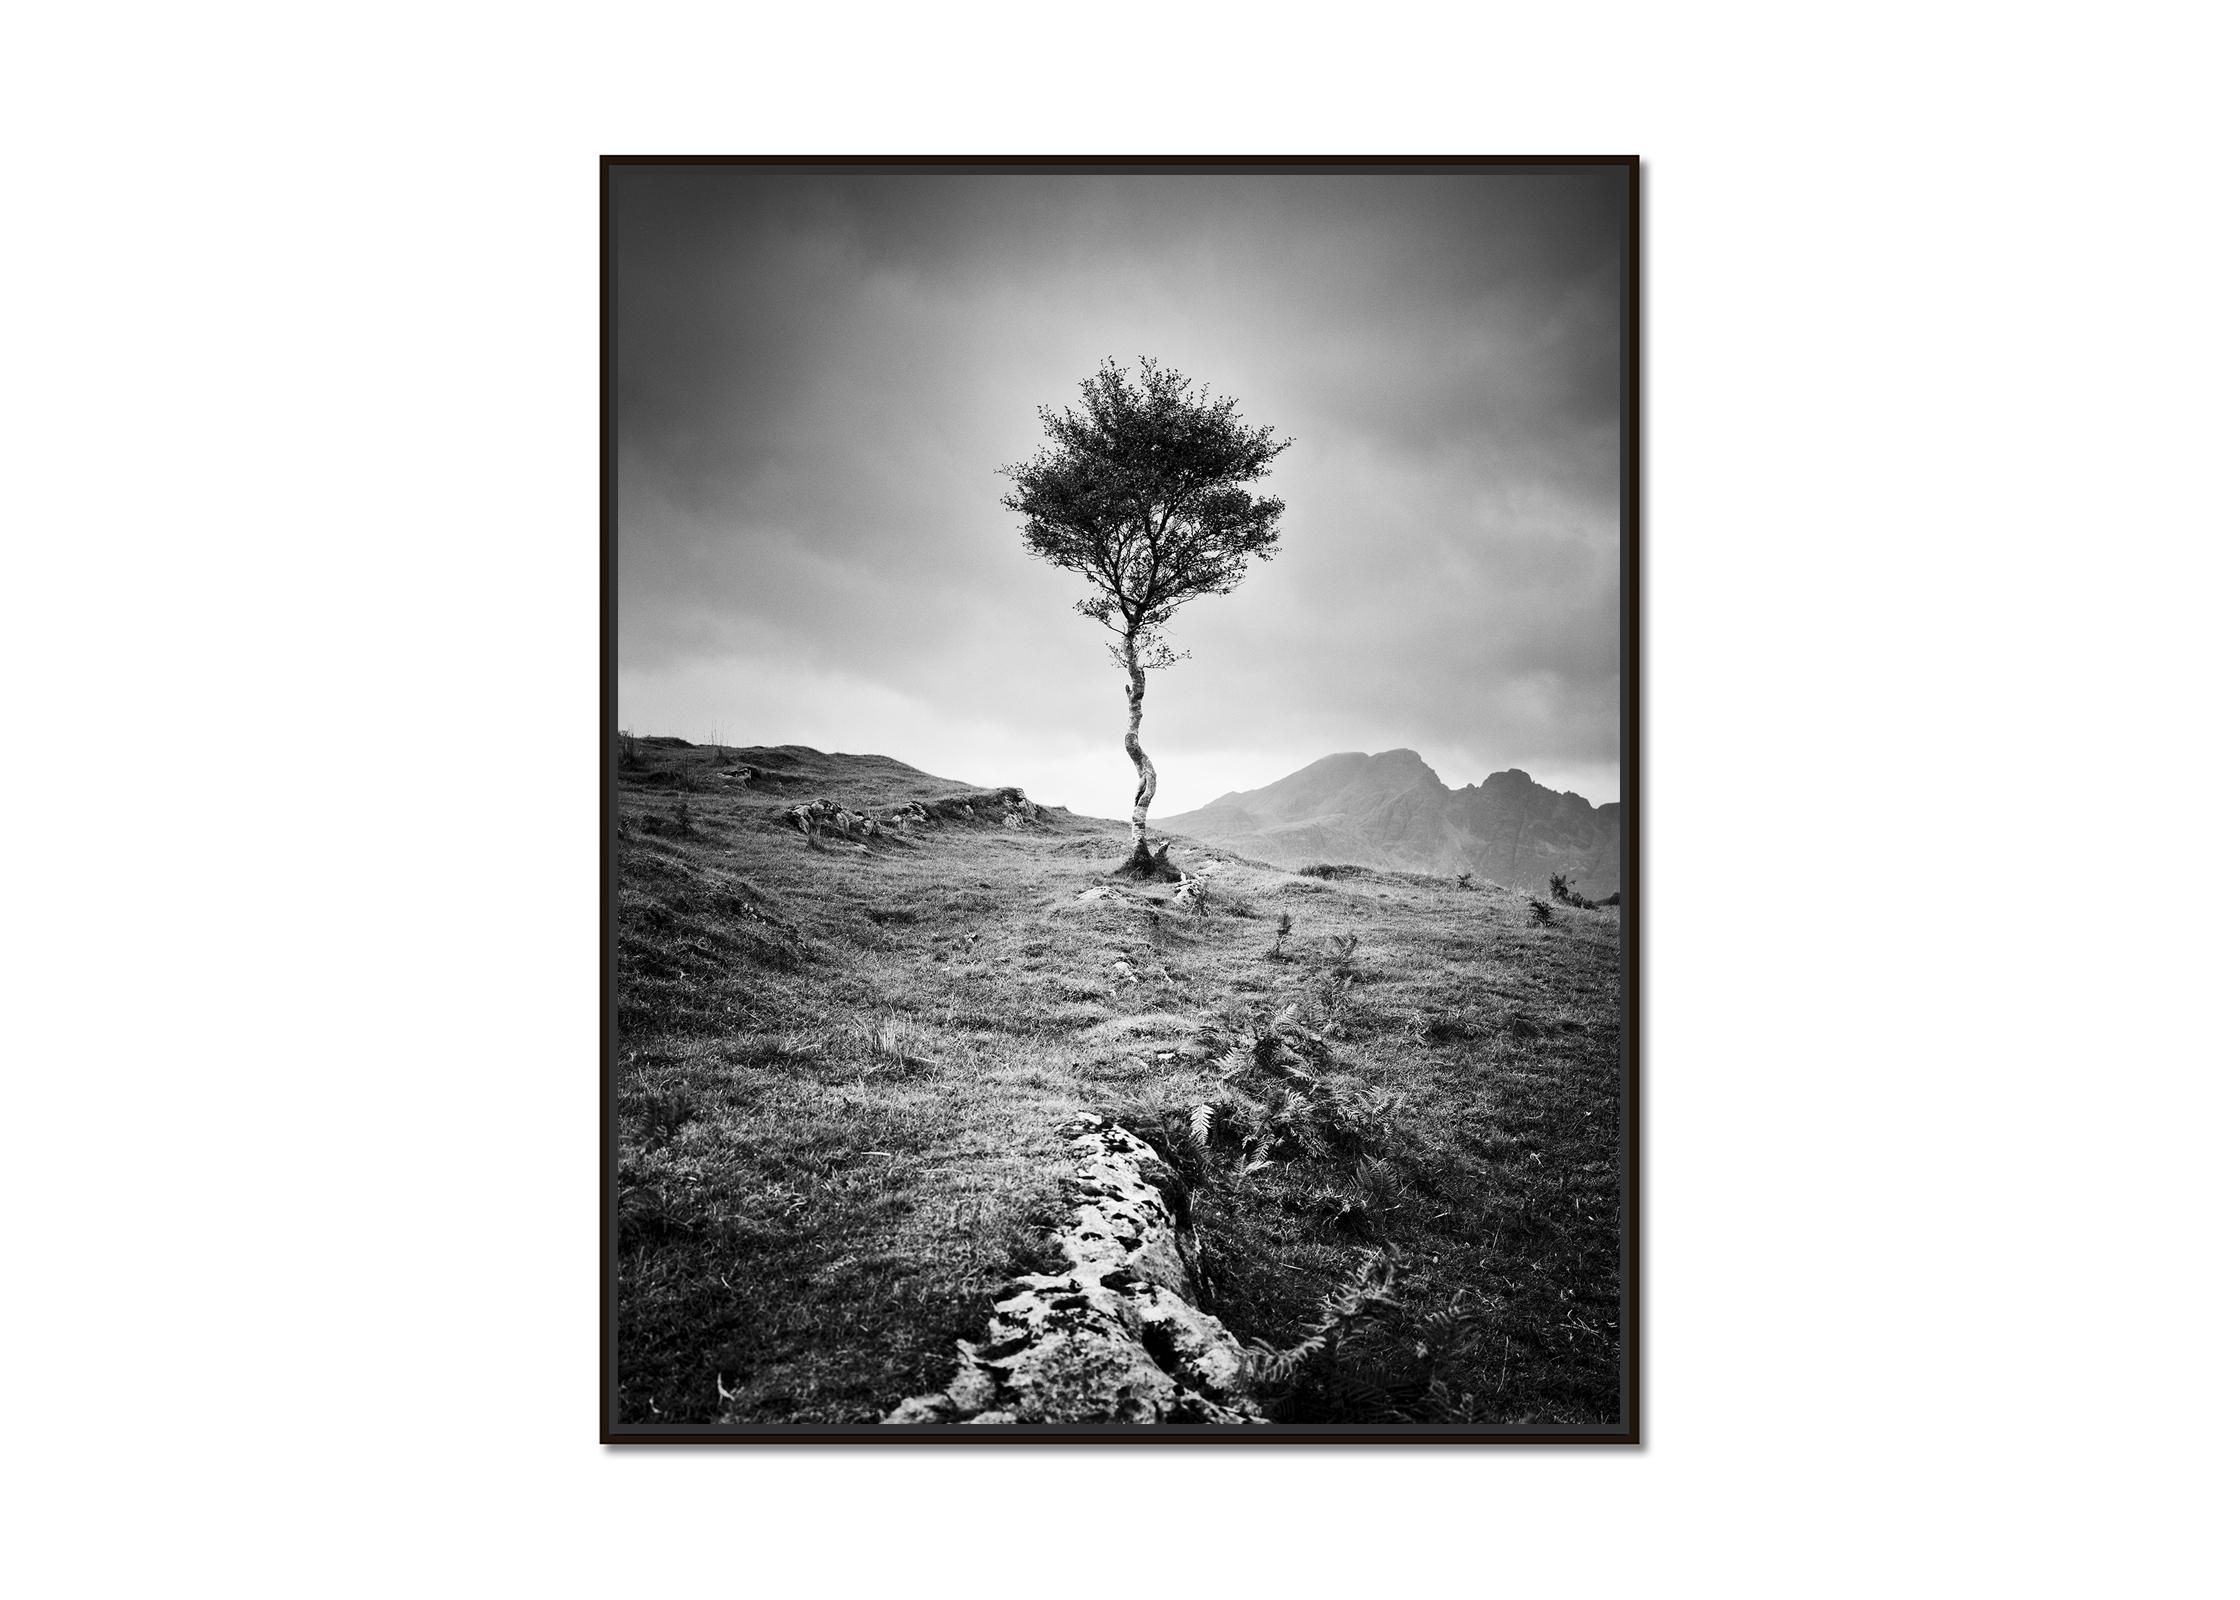 Strong Birch, Isle of Skye, Scotland, black and white photography, landscape - Photograph by Gerald Berghammer